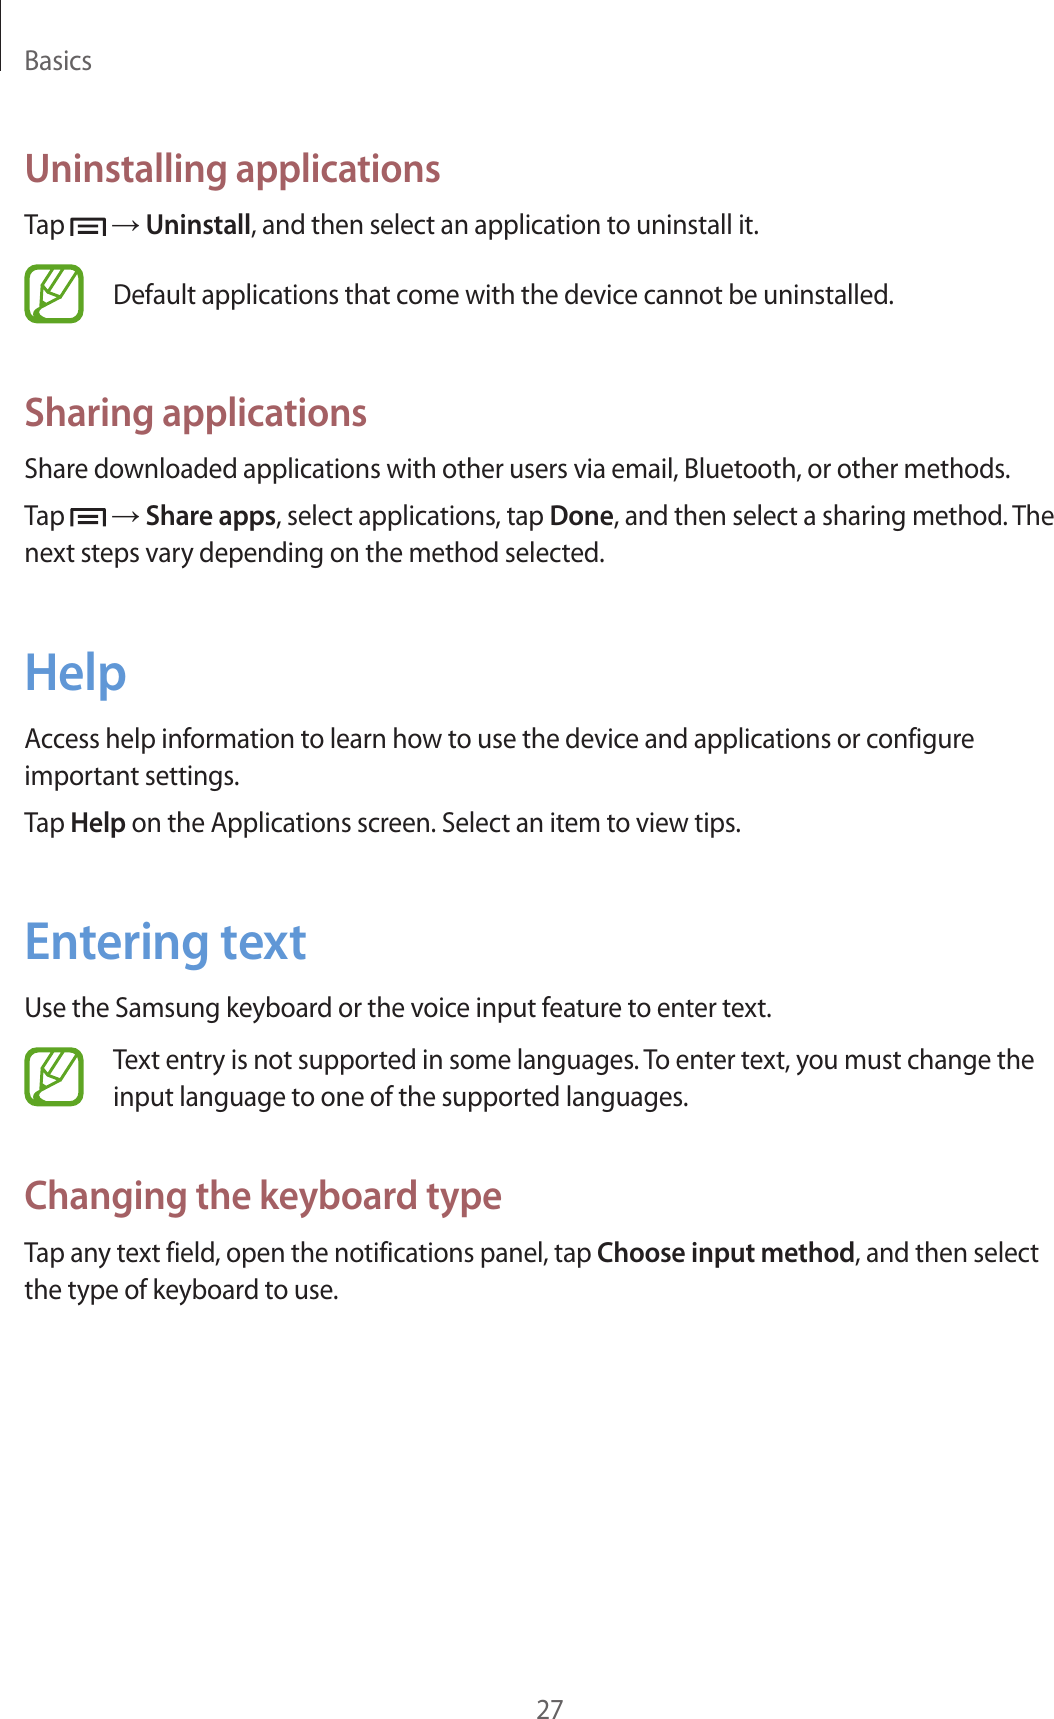 Basics27Uninstalling applicationsTap   → Uninstall, and then select an application to uninstall it.Default applications that come with the device cannot be uninstalled.Sharing applicationsShare downloaded applications with other users via email, Bluetooth, or other methods.Tap   → Share apps, select applications, tap Done, and then select a sharing method. The next steps vary depending on the method selected.HelpAccess help information to learn how to use the device and applications or configure important settings.Tap Help on the Applications screen. Select an item to view tips.Entering textUse the Samsung keyboard or the voice input feature to enter text.Text entry is not supported in some languages. To enter text, you must change the input language to one of the supported languages.Changing the keyboard typeTap any text field, open the notifications panel, tap Choose input method, and then select the type of keyboard to use.